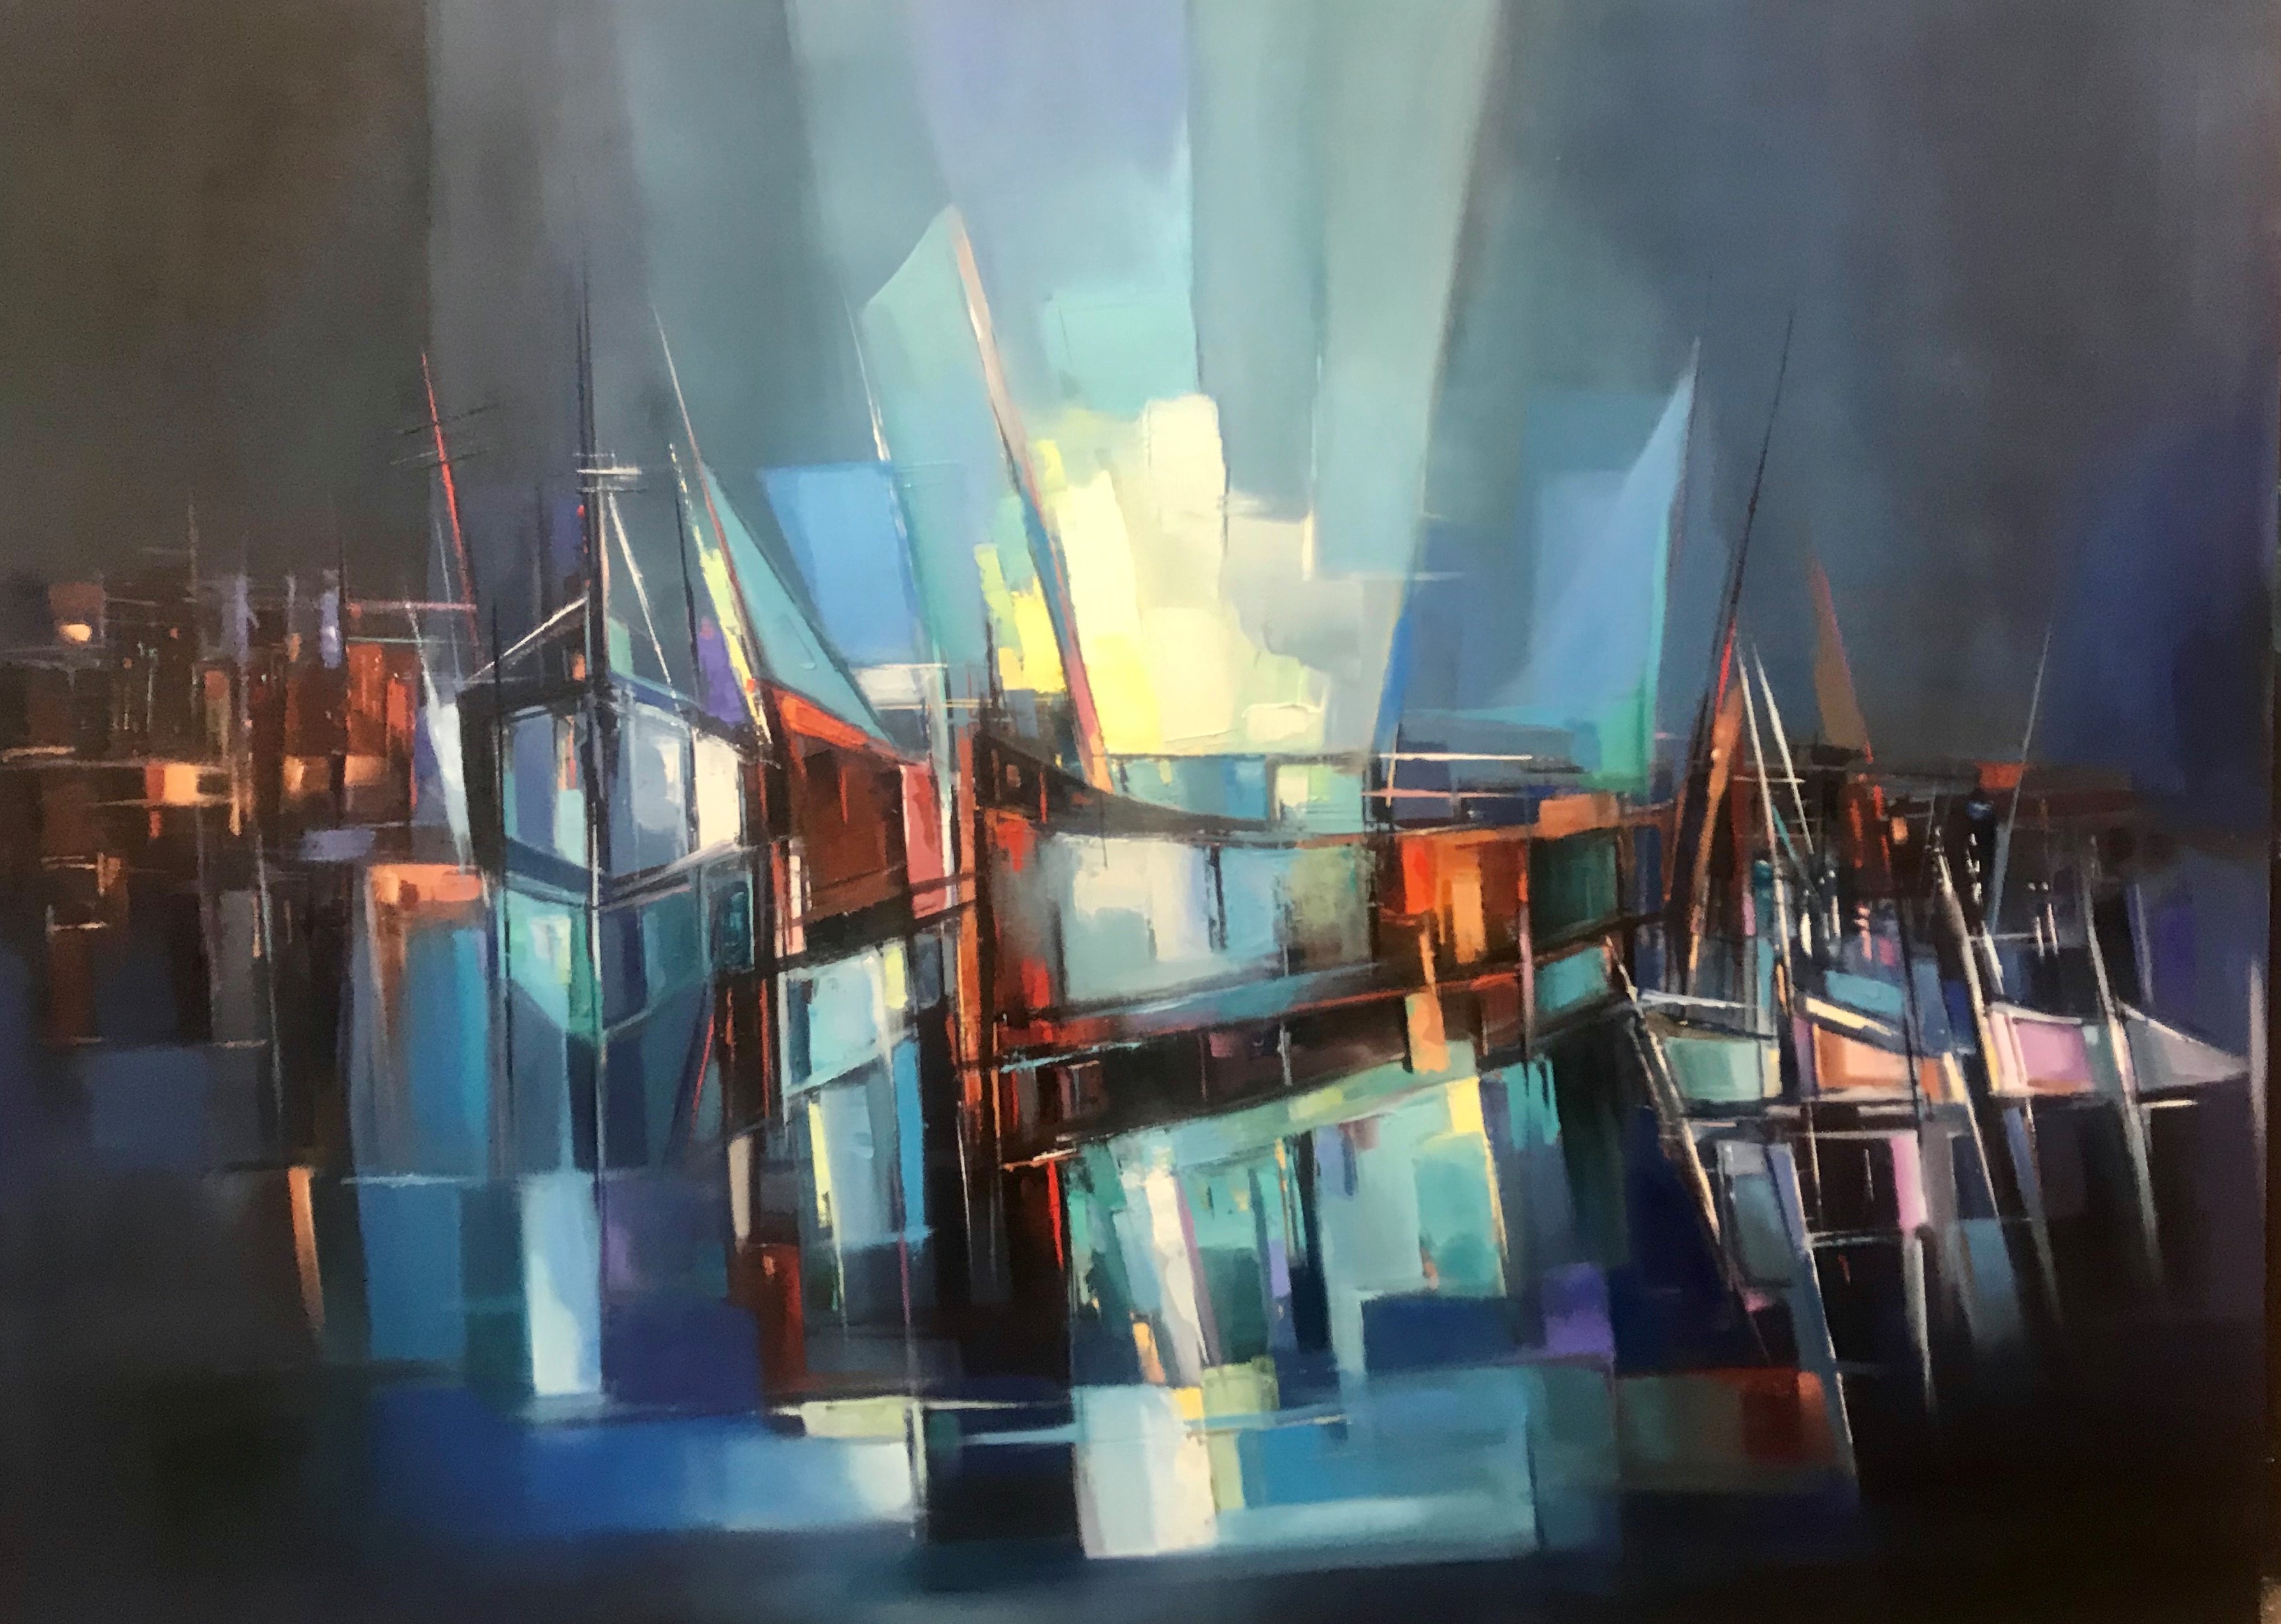 Abstract art. Title: Living on the Edge 8, Oil on Canvas, 36x48 in by Farahnaz Samari.